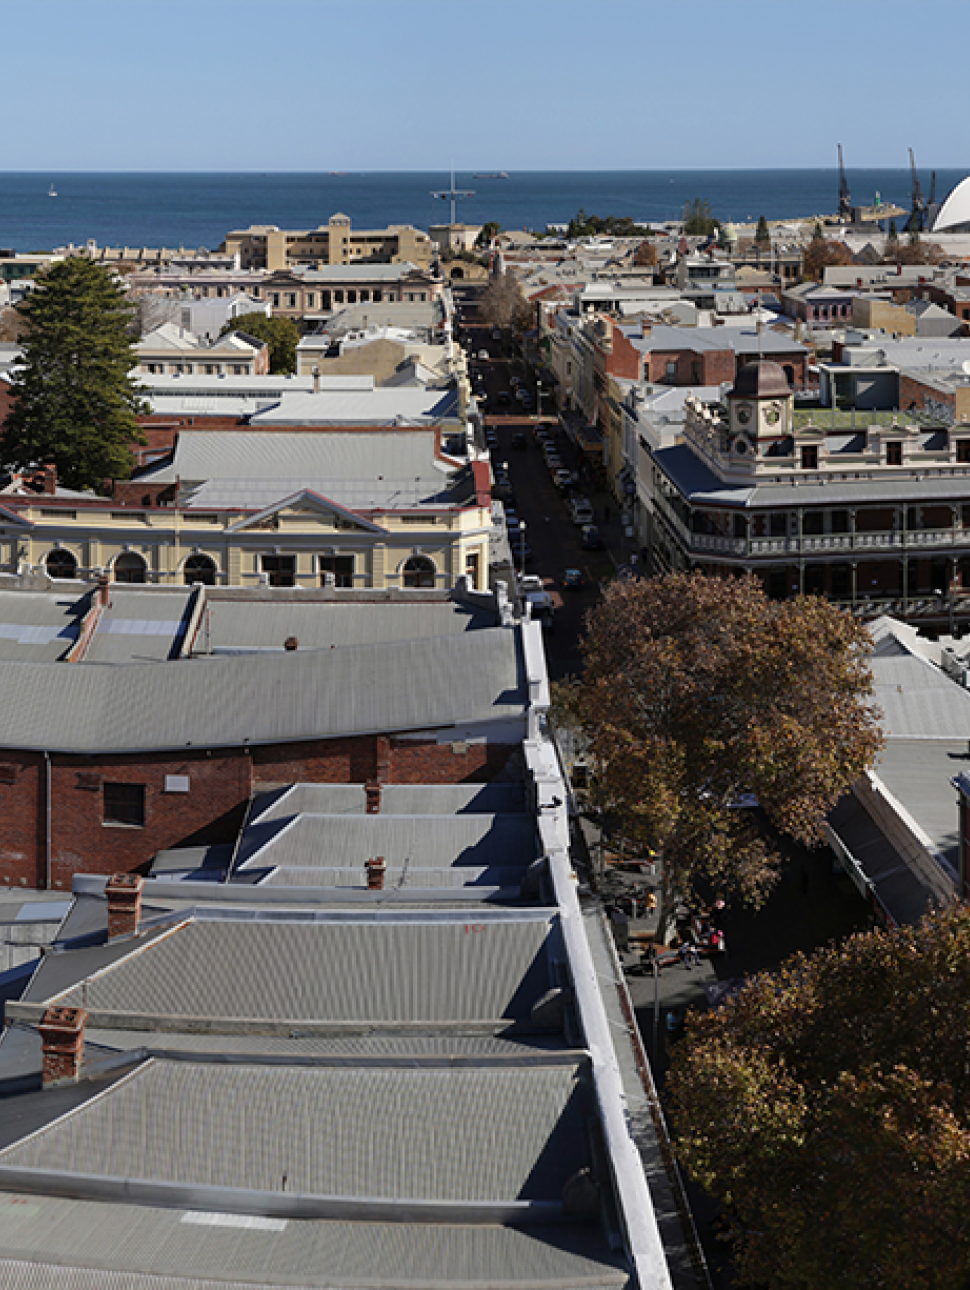 An aerial view of Fremantle